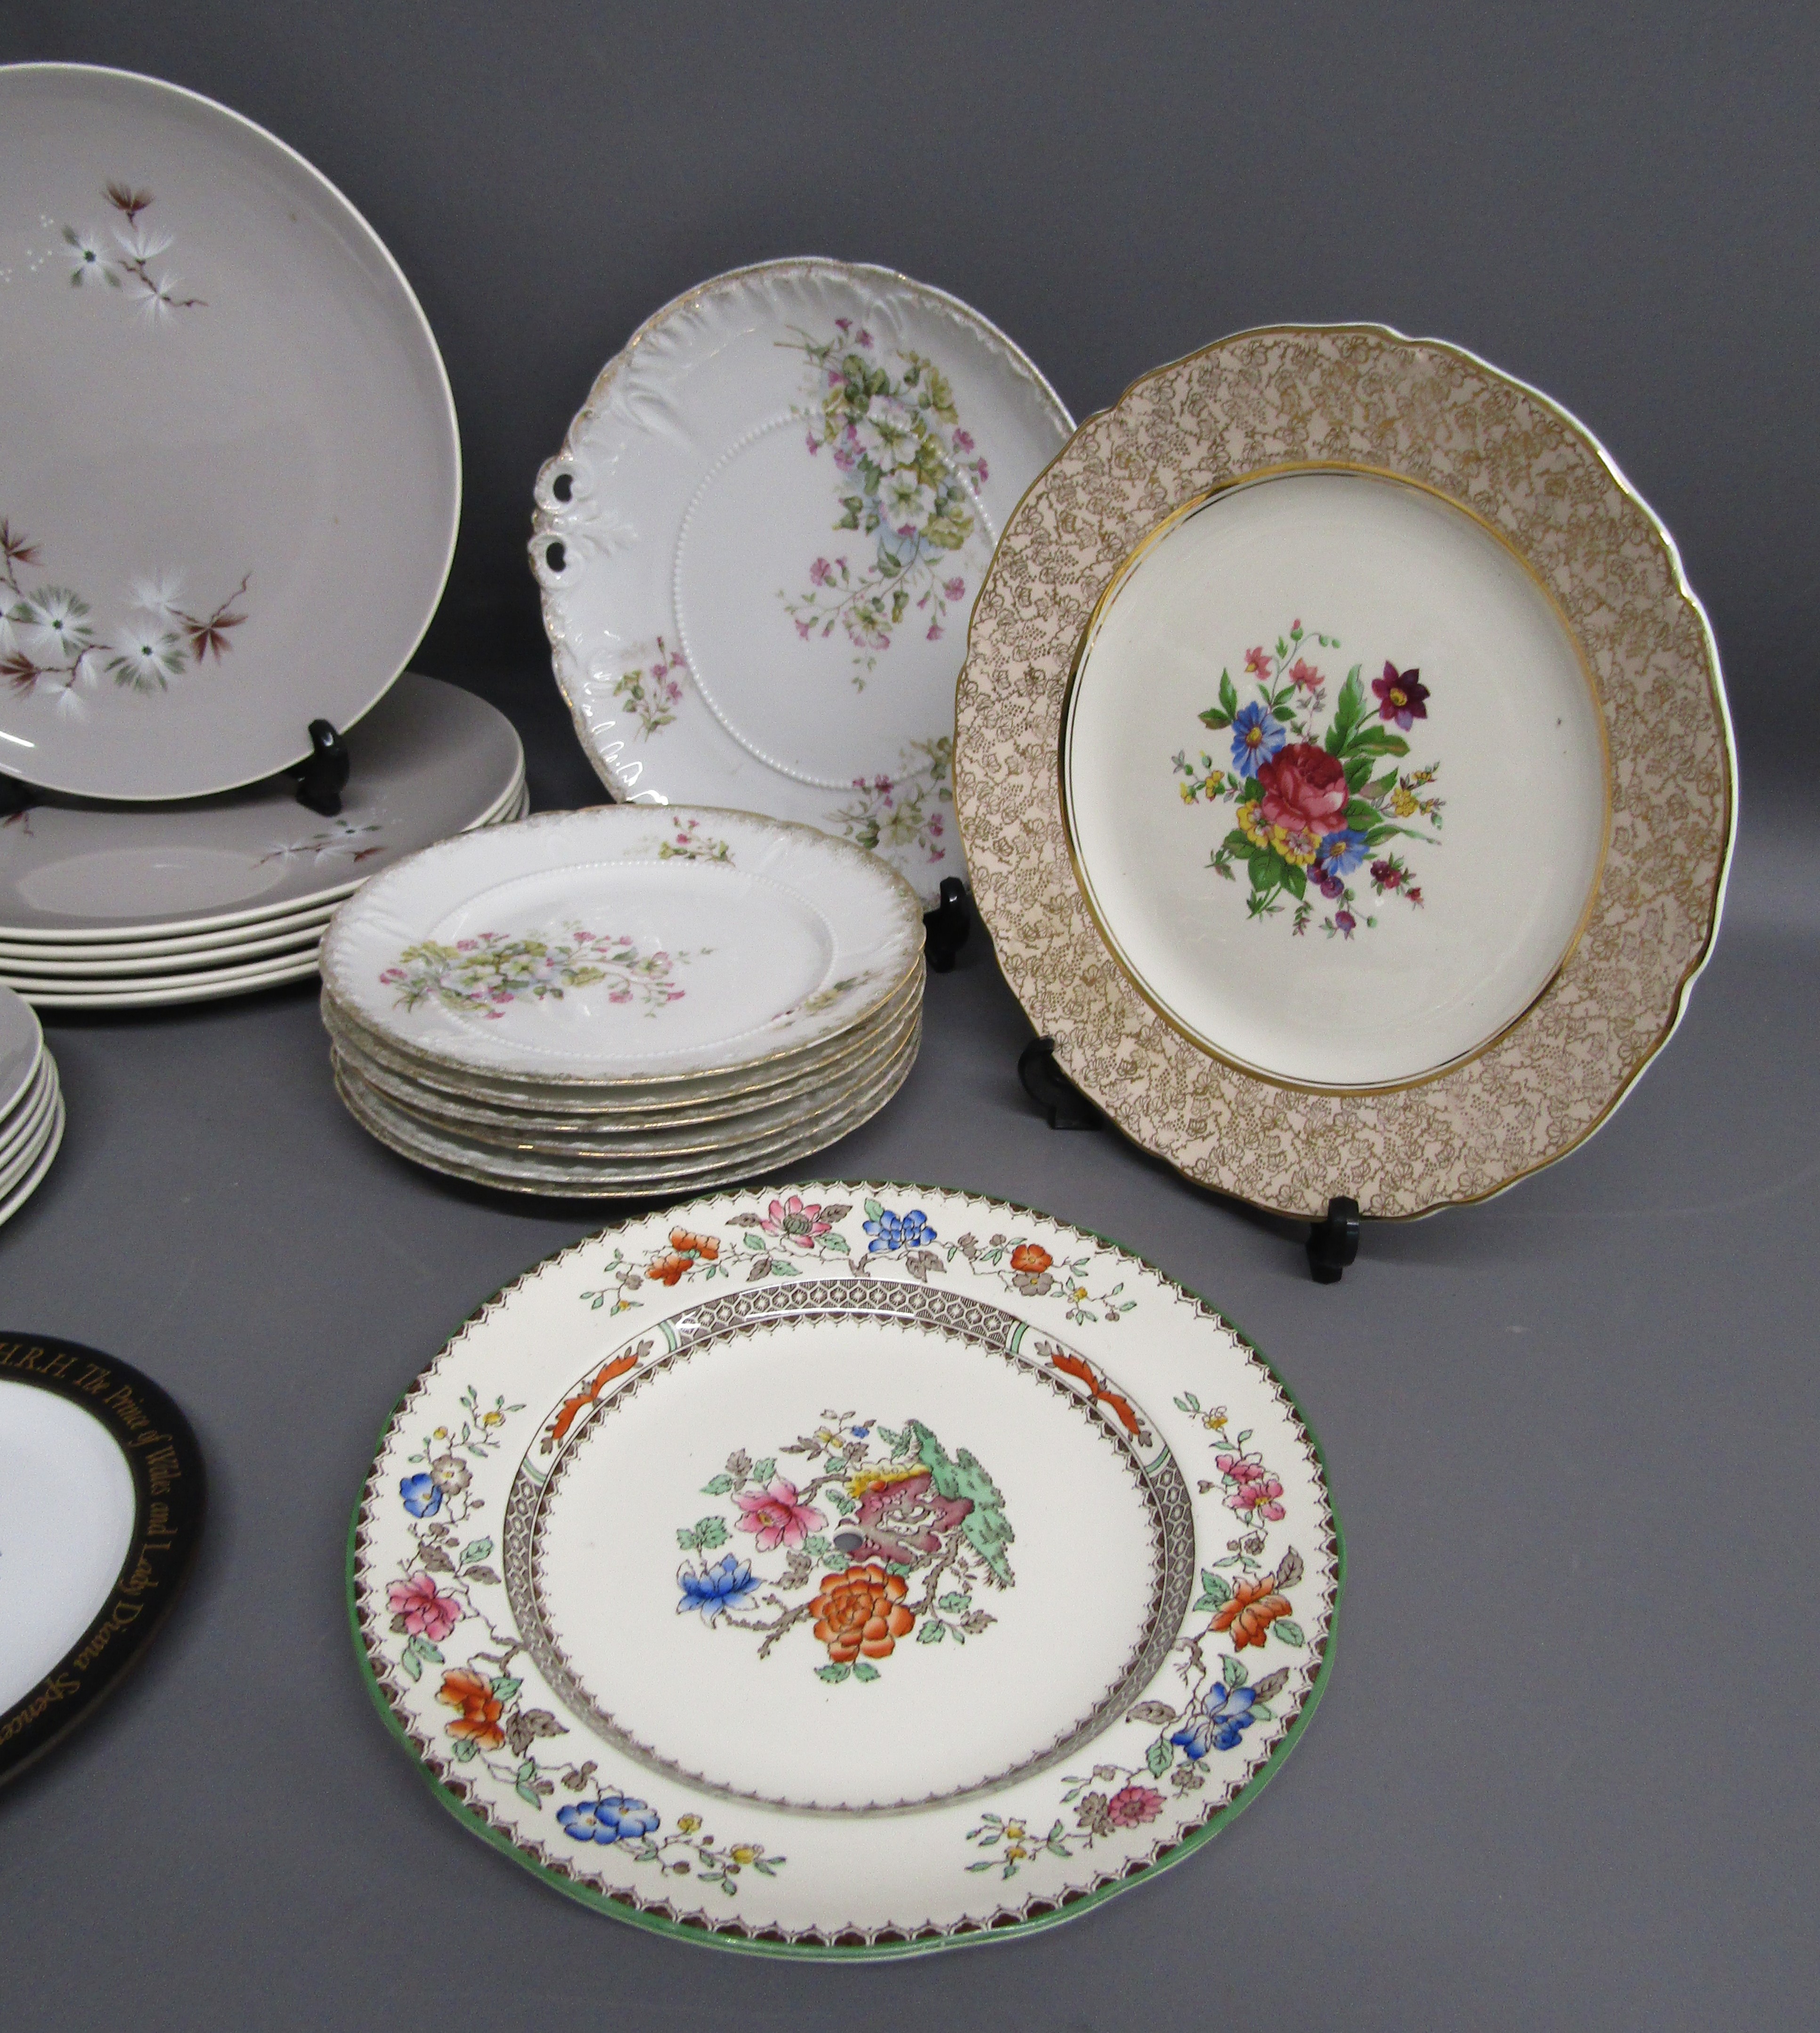 Royal Doulton Frost Pine plates and bowls, Carl Tielsch 70570 cake plate and plates, Midwinter - Image 4 of 5